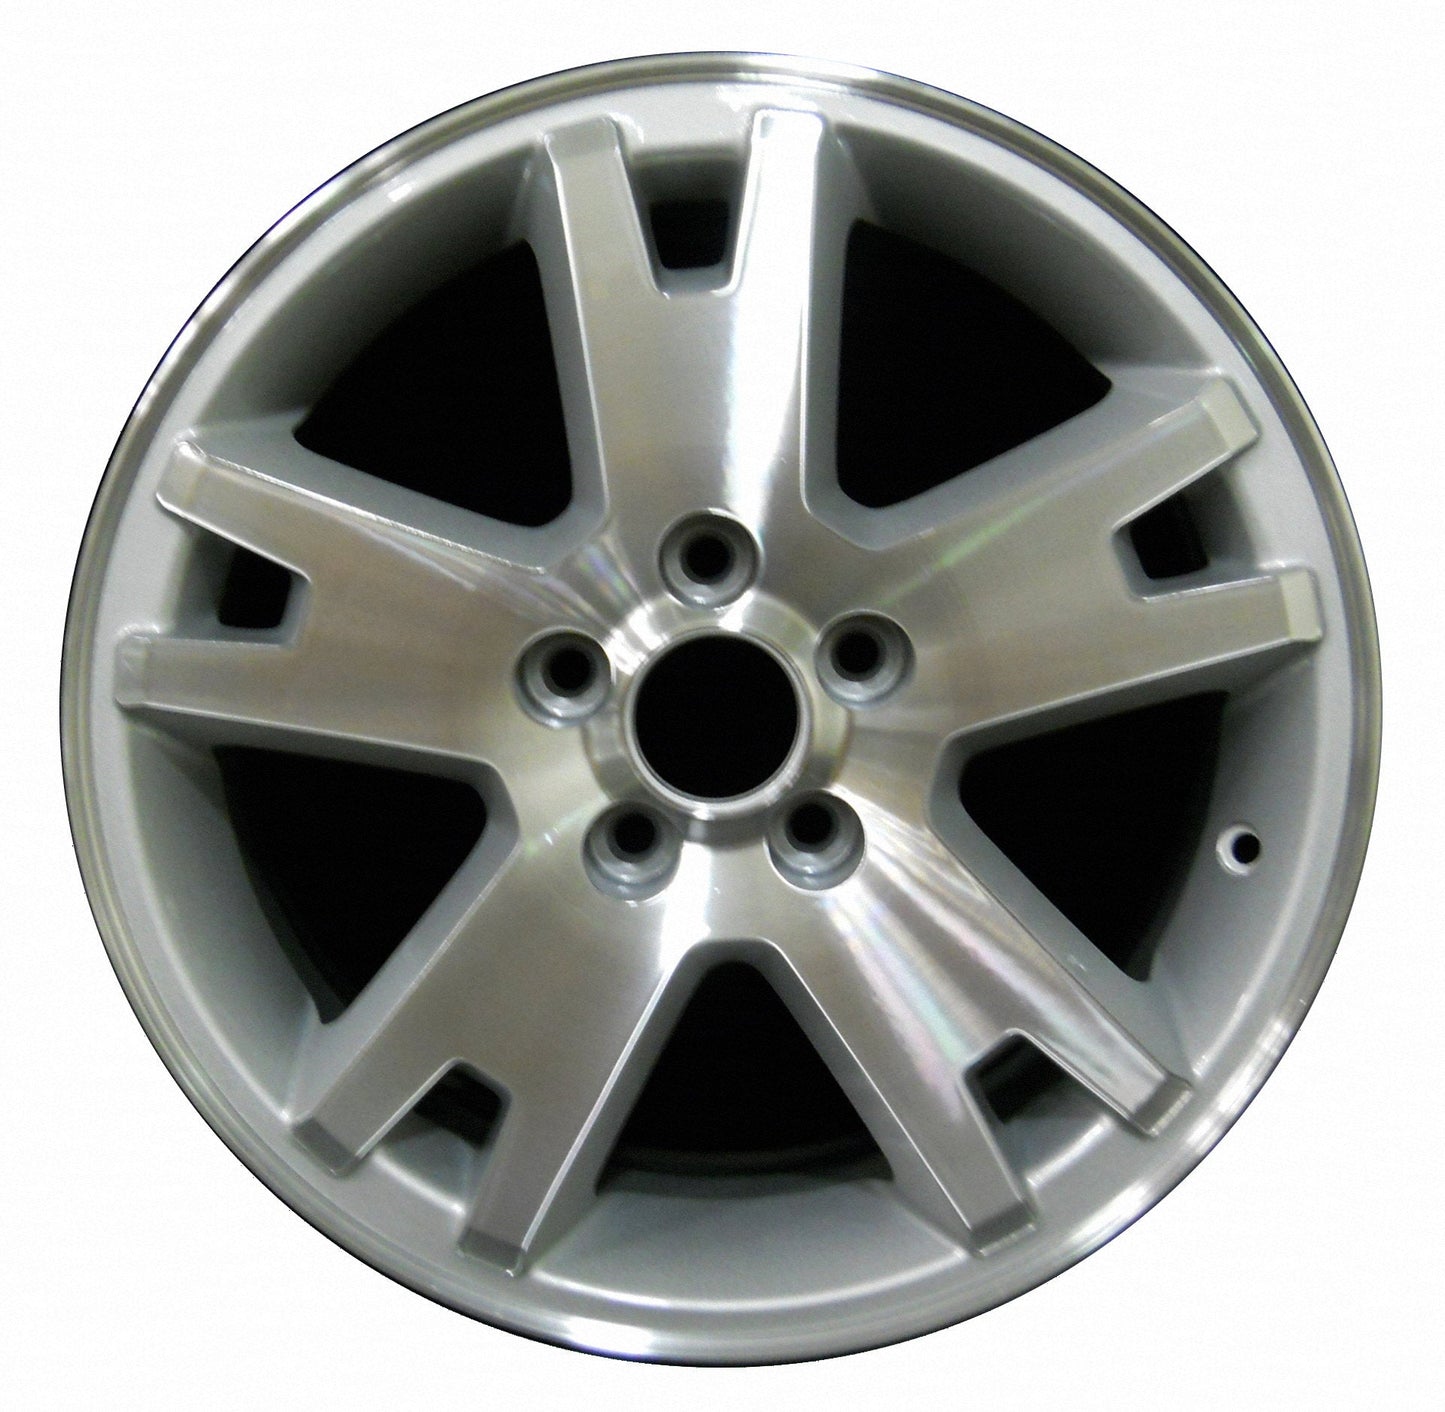 Ford Explorer  2006, 2007, 2008, 2009, 2010 Factory OEM Car Wheel Size 17x7.5 Alloy WAO.3626.PS02.MA